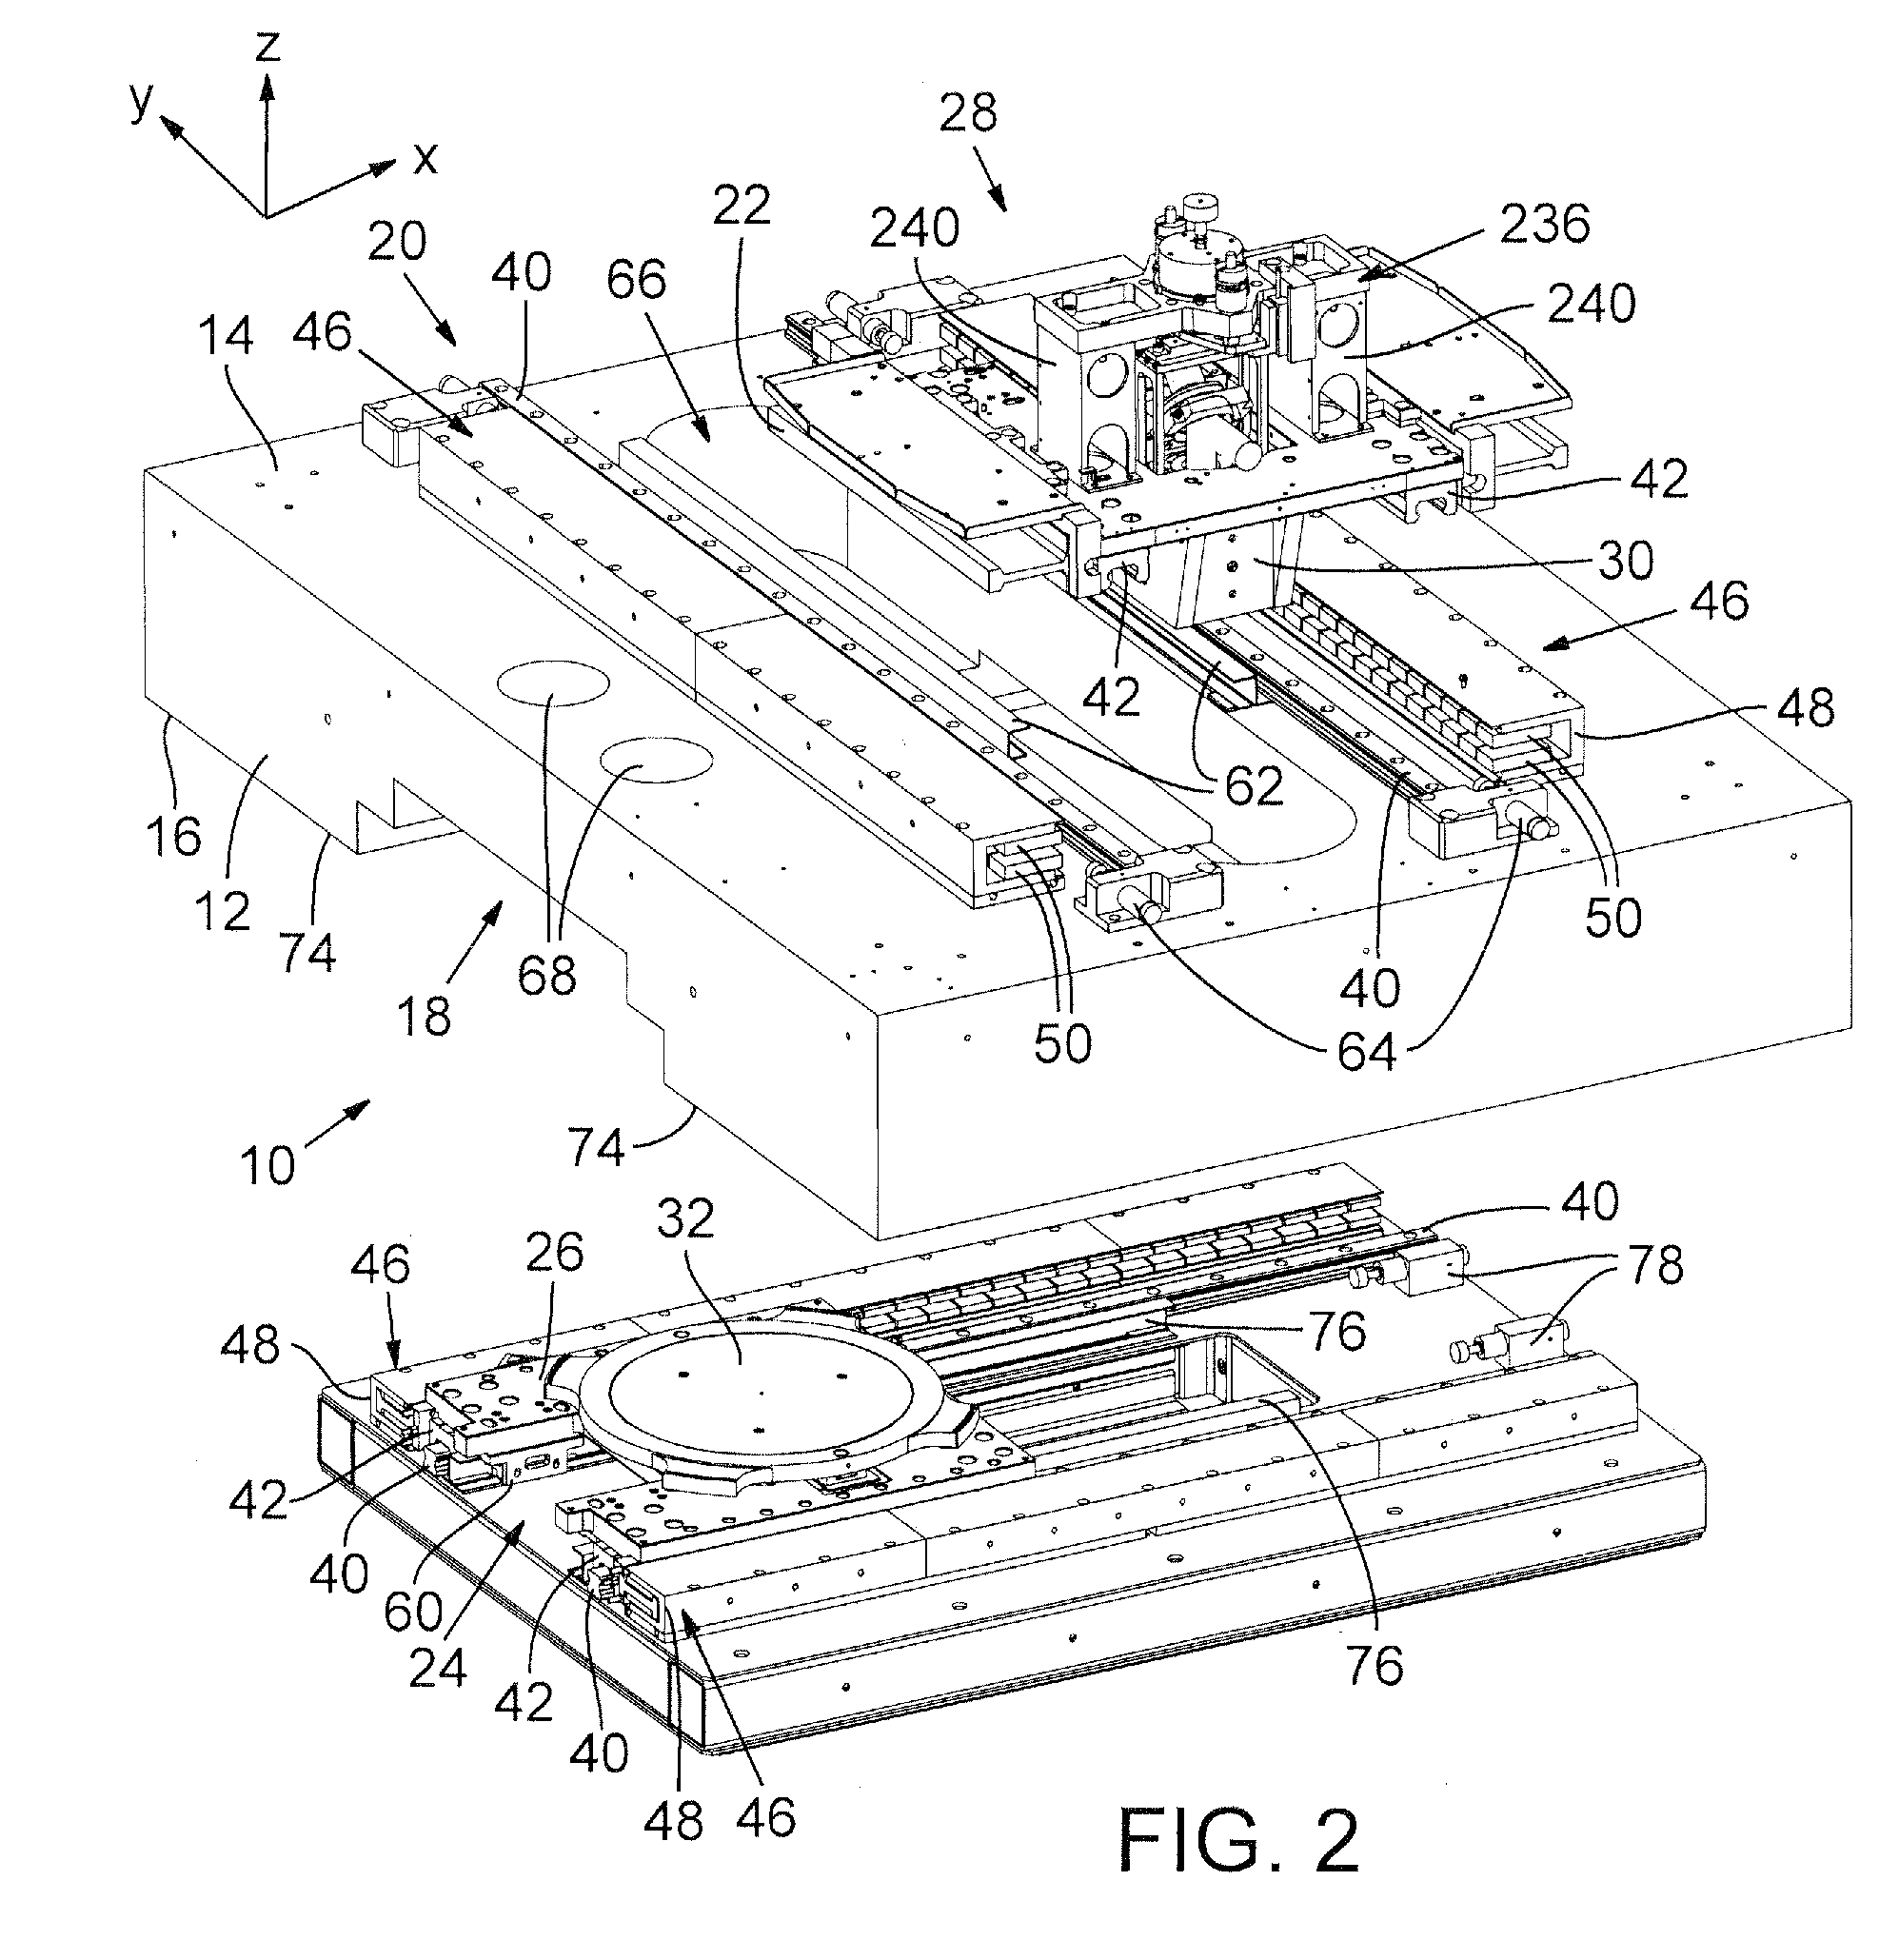 Specimen inspection stage implemented with processing stage coupling mechanism